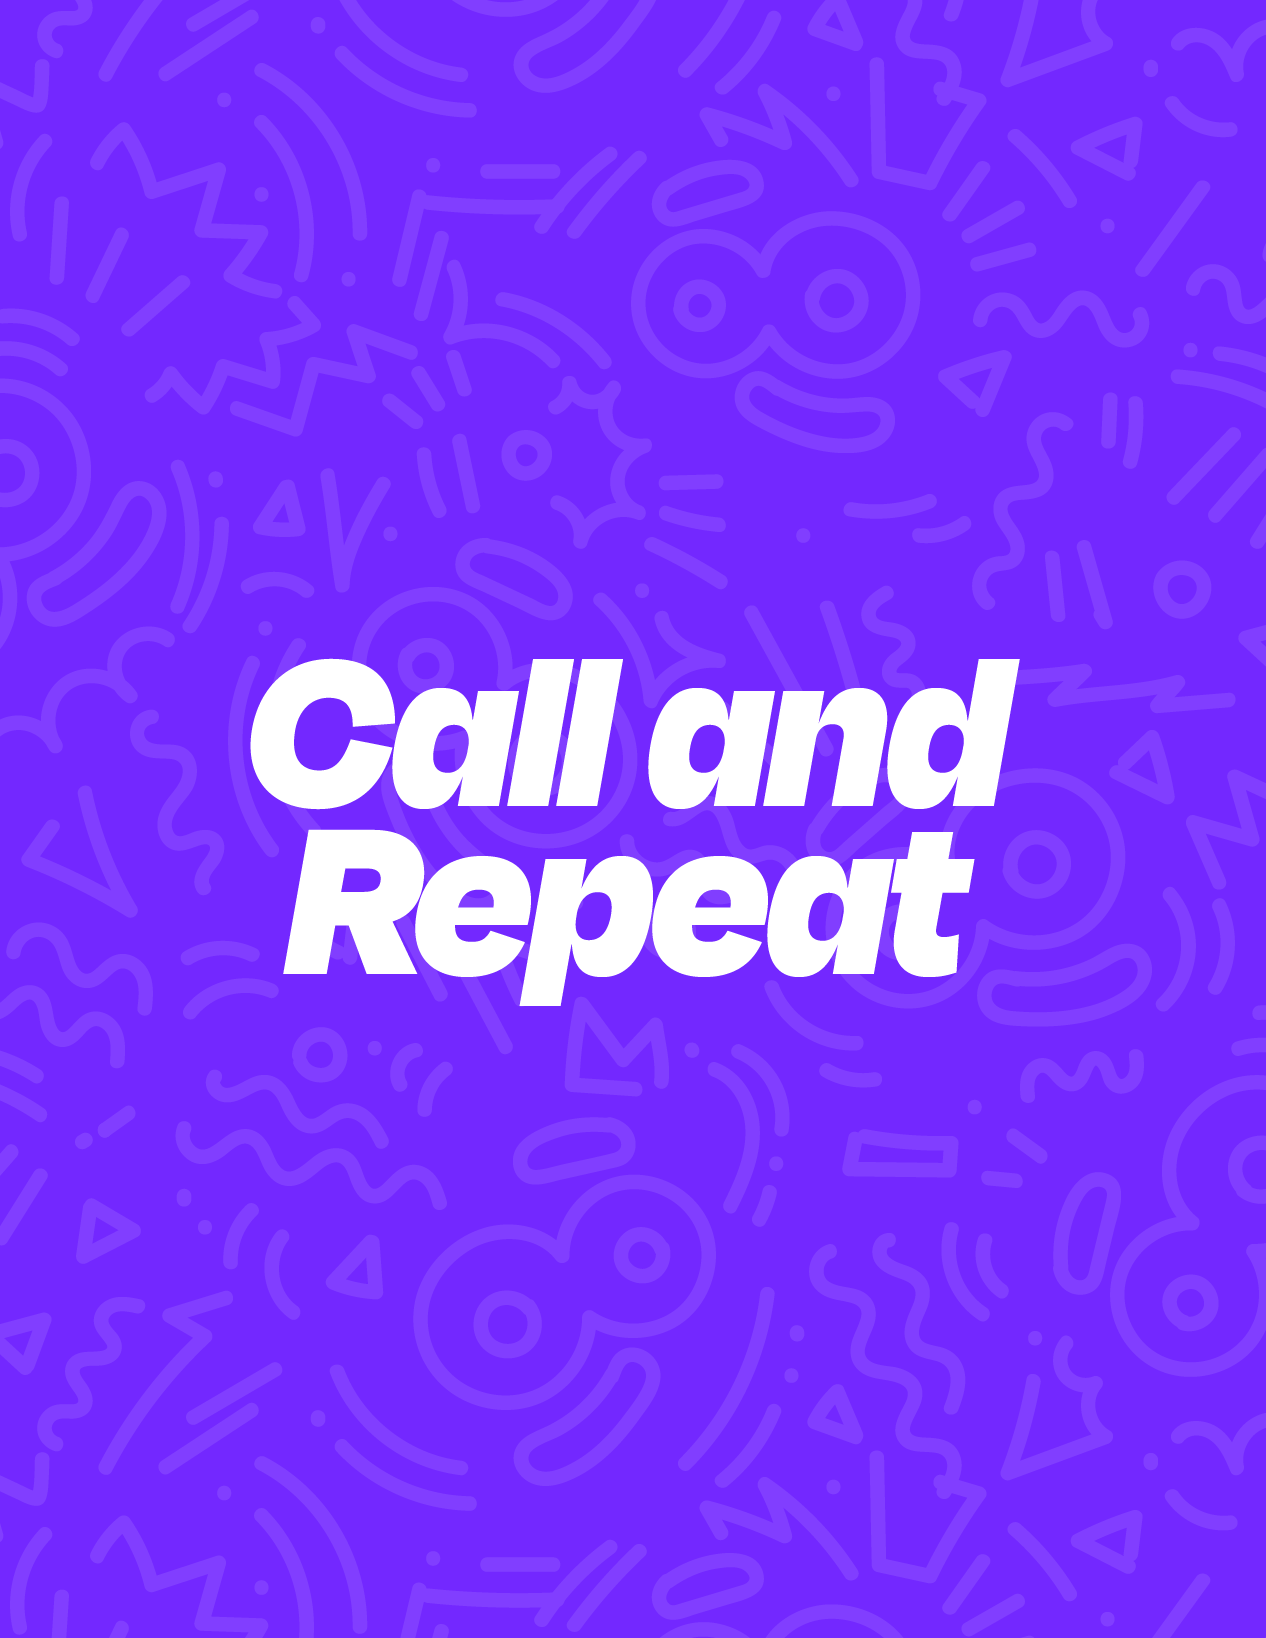 Call and Repeat